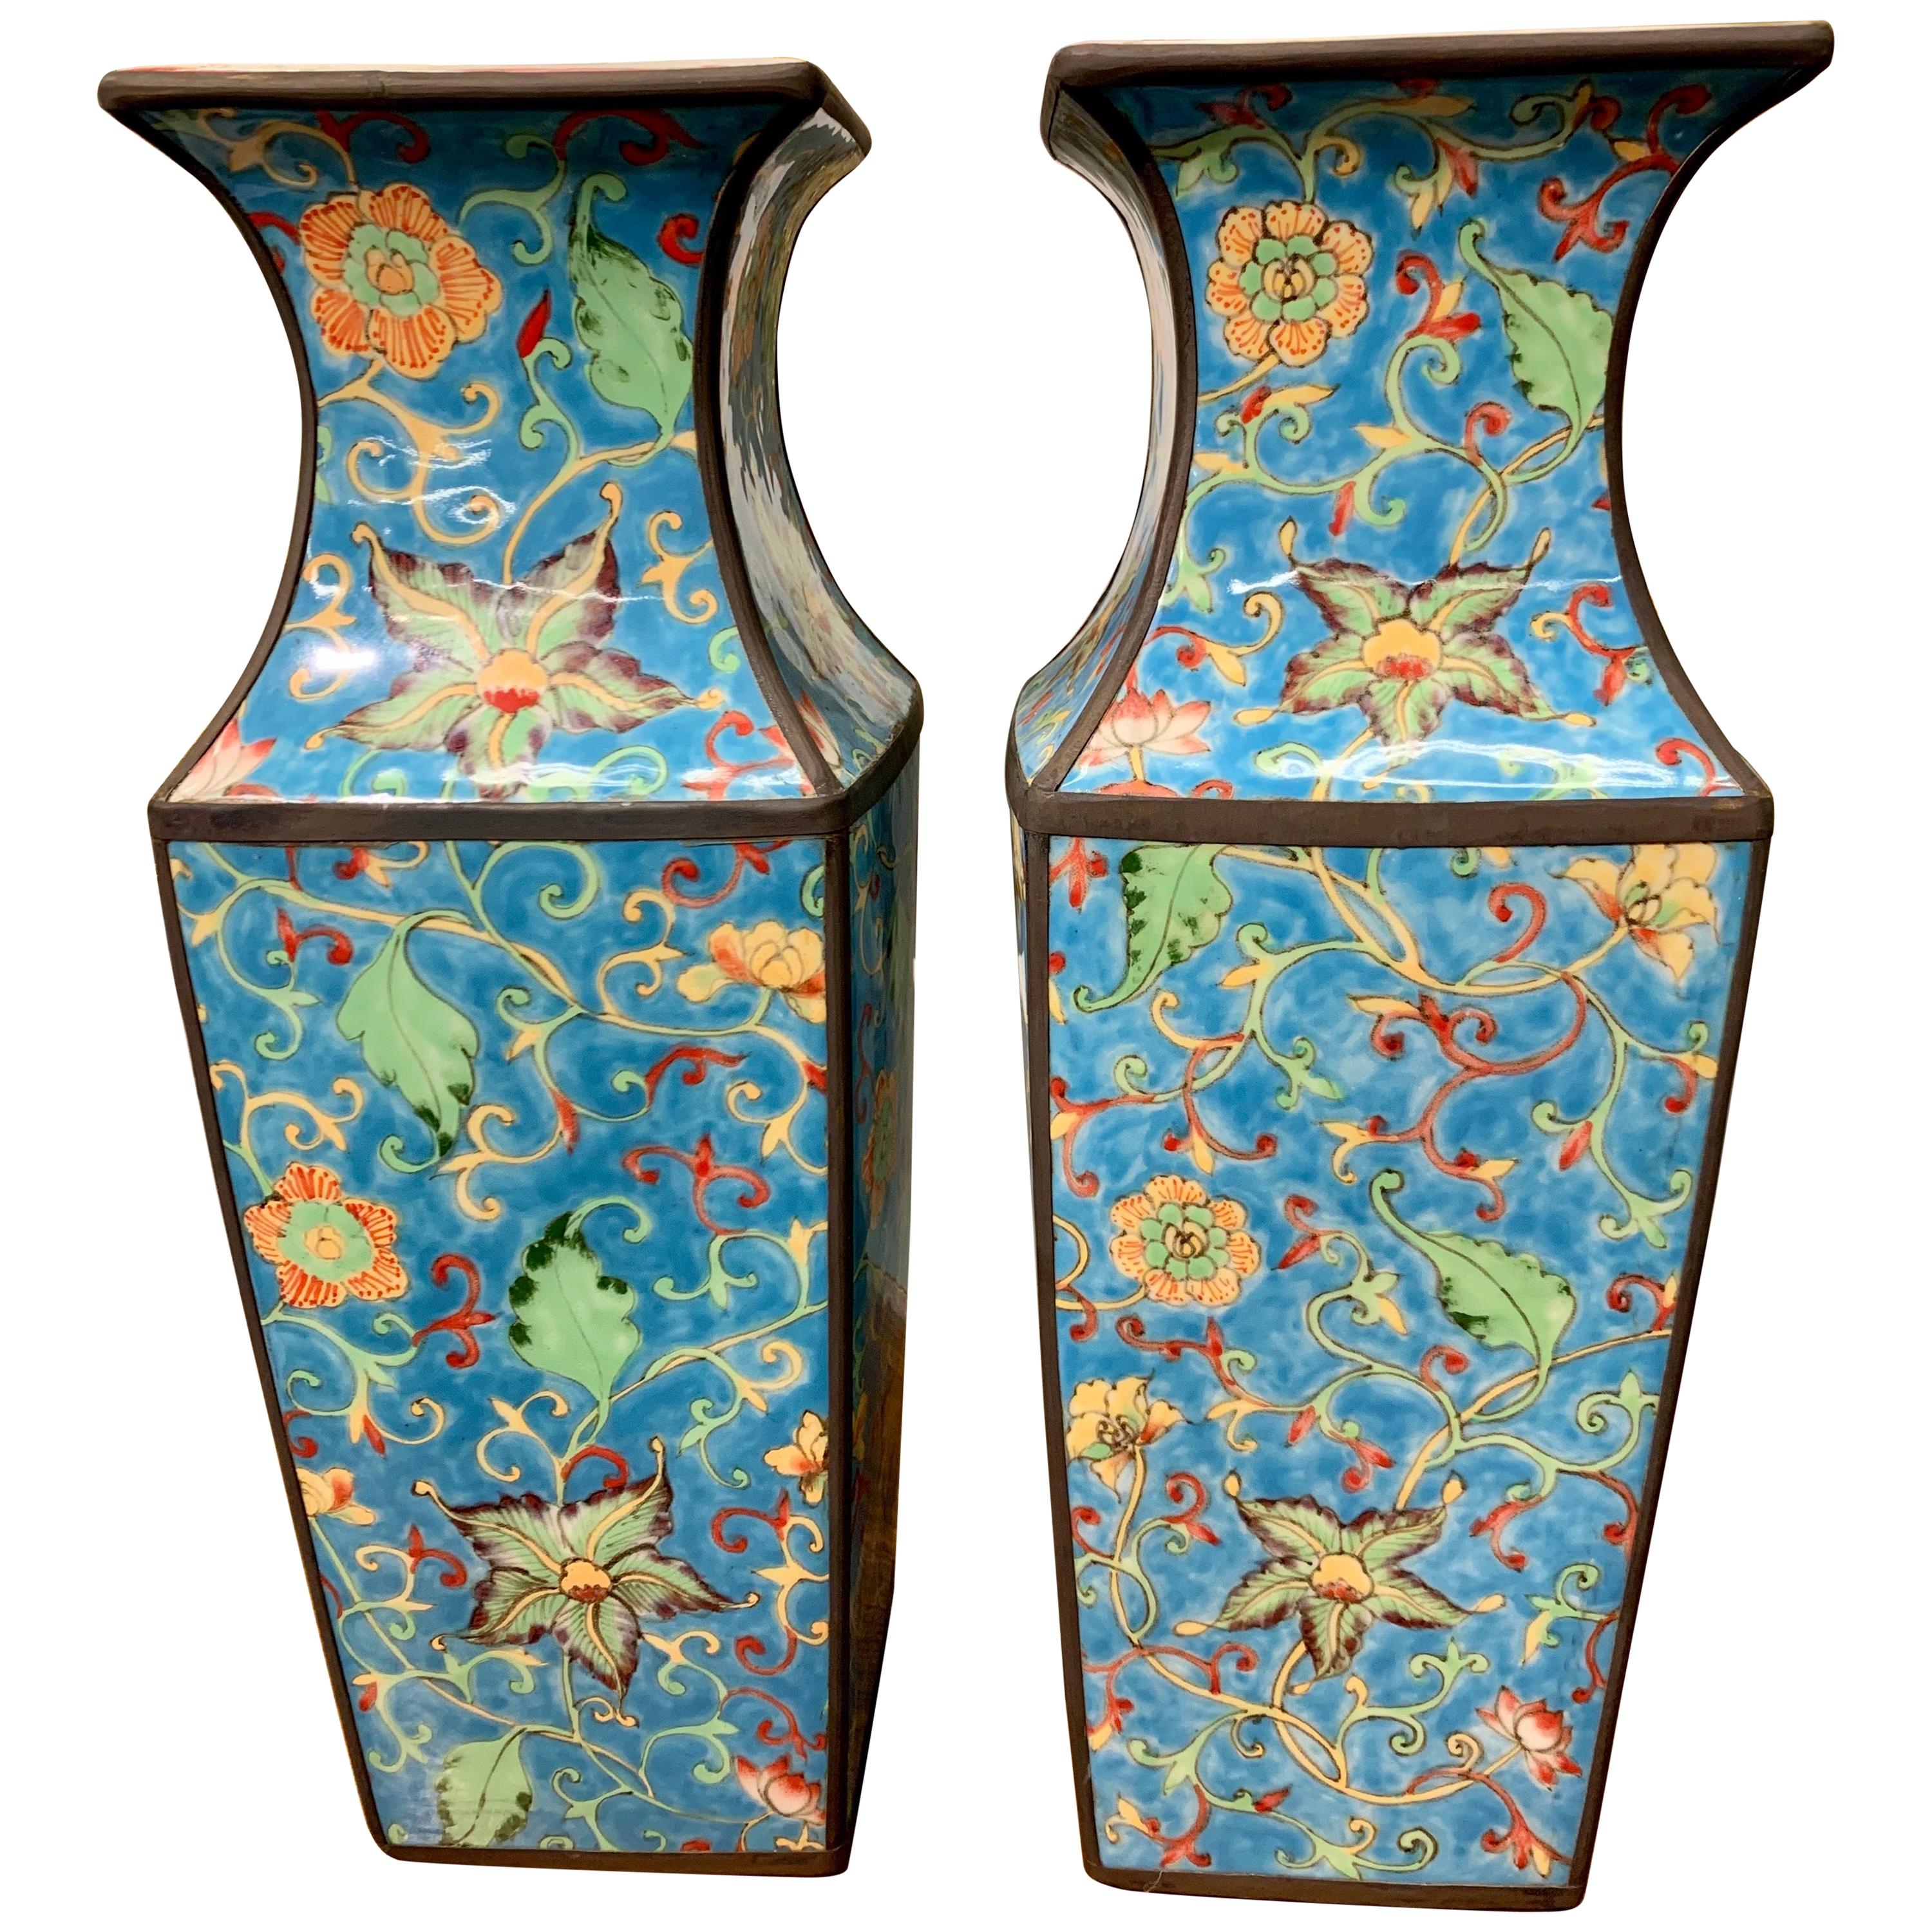 Pair of Asian Chinoiserie Turquoise Enamel and Brass Vases Vessels